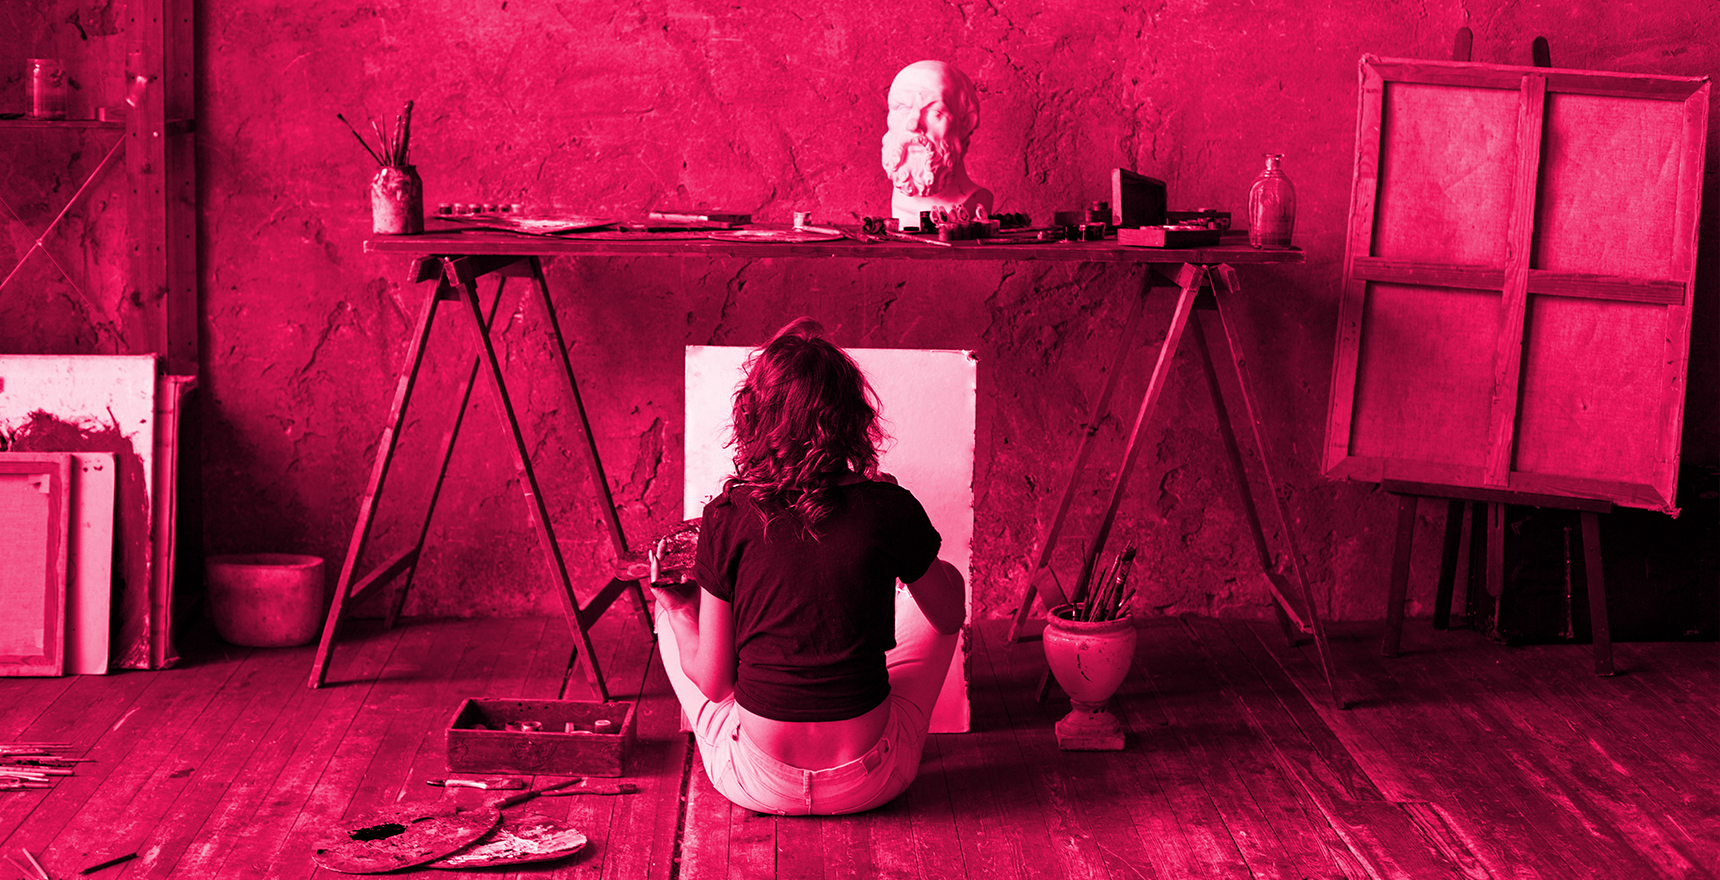 red stained photo of young woman seated on the floor of studio painting view from behind